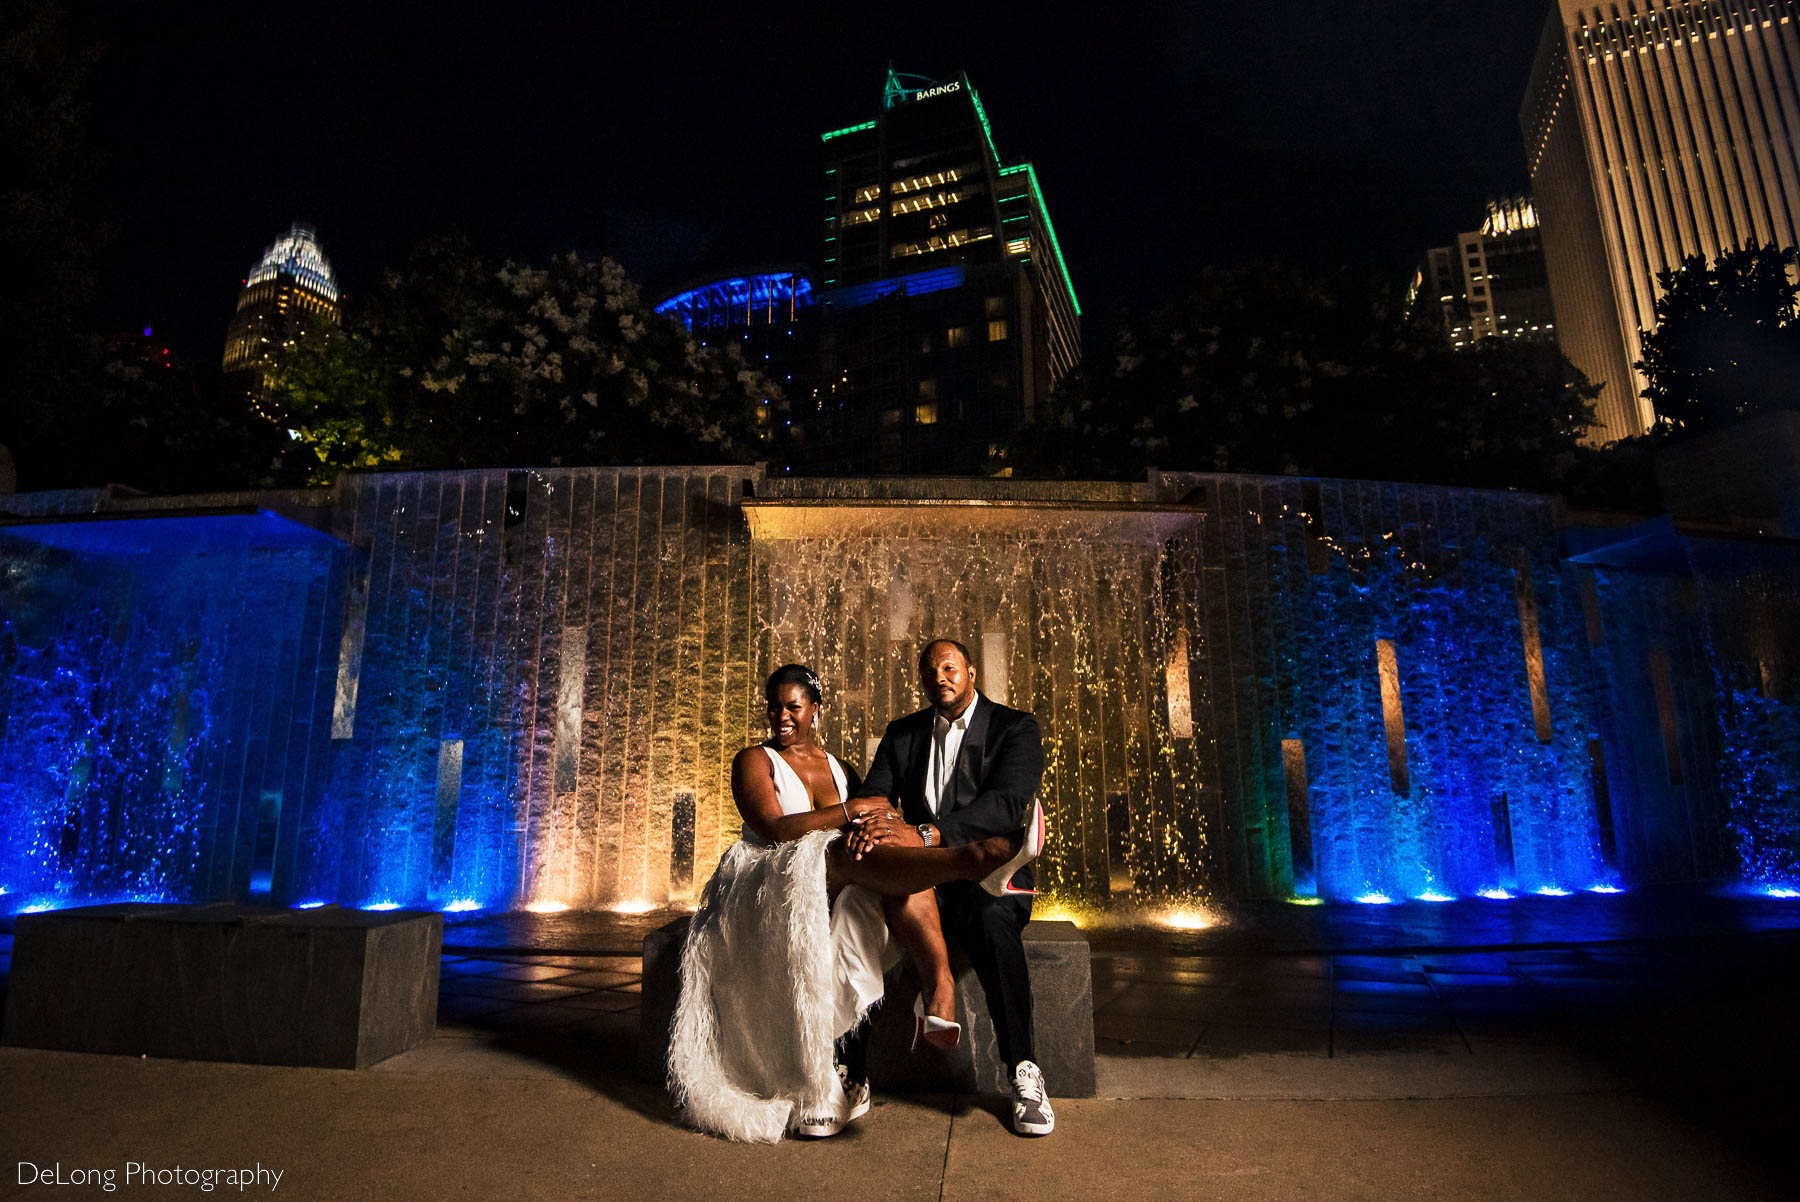 Black couple fun wedding portrait in front of a blue and yellow water feature at Romare Bearden Park in Uptown Charlotte, NC by Charlotte wedding photographers DeLong Photography